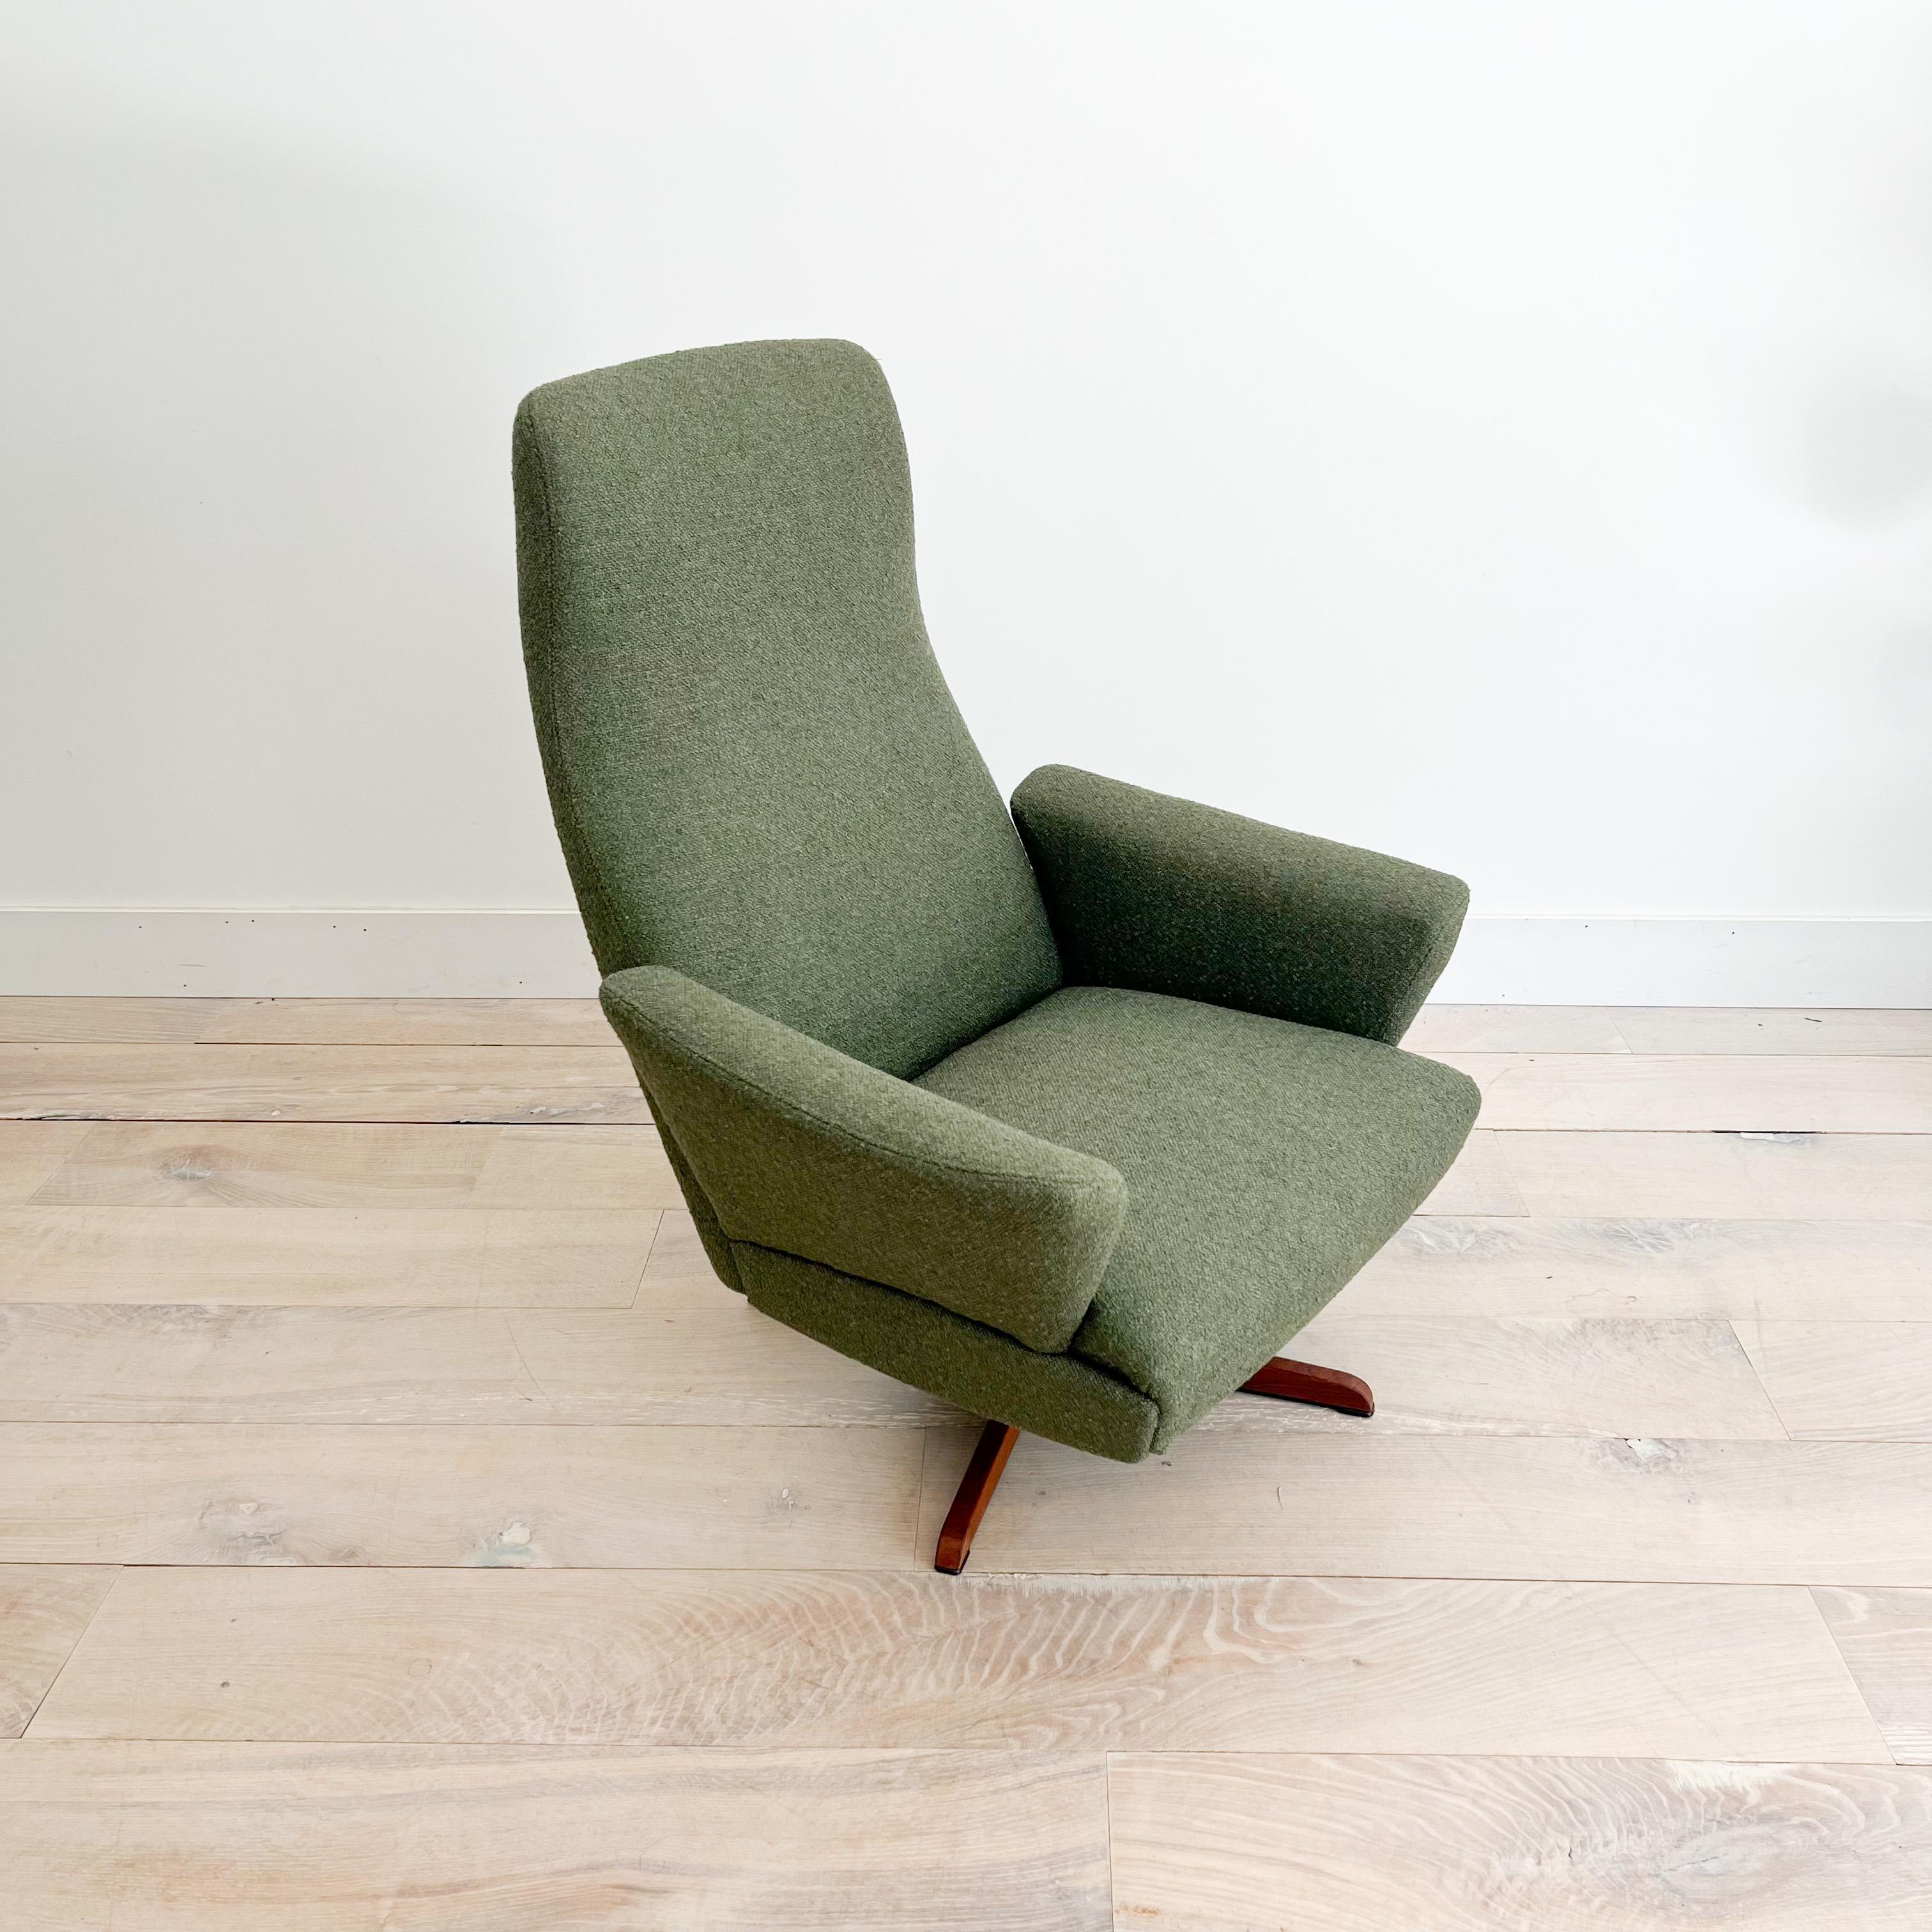 Mid-Century Modern high back swivel lounge chair by IB Madsen for Schubell. New olive green tweed upholstery. Some light scuffing/scratching to the base.